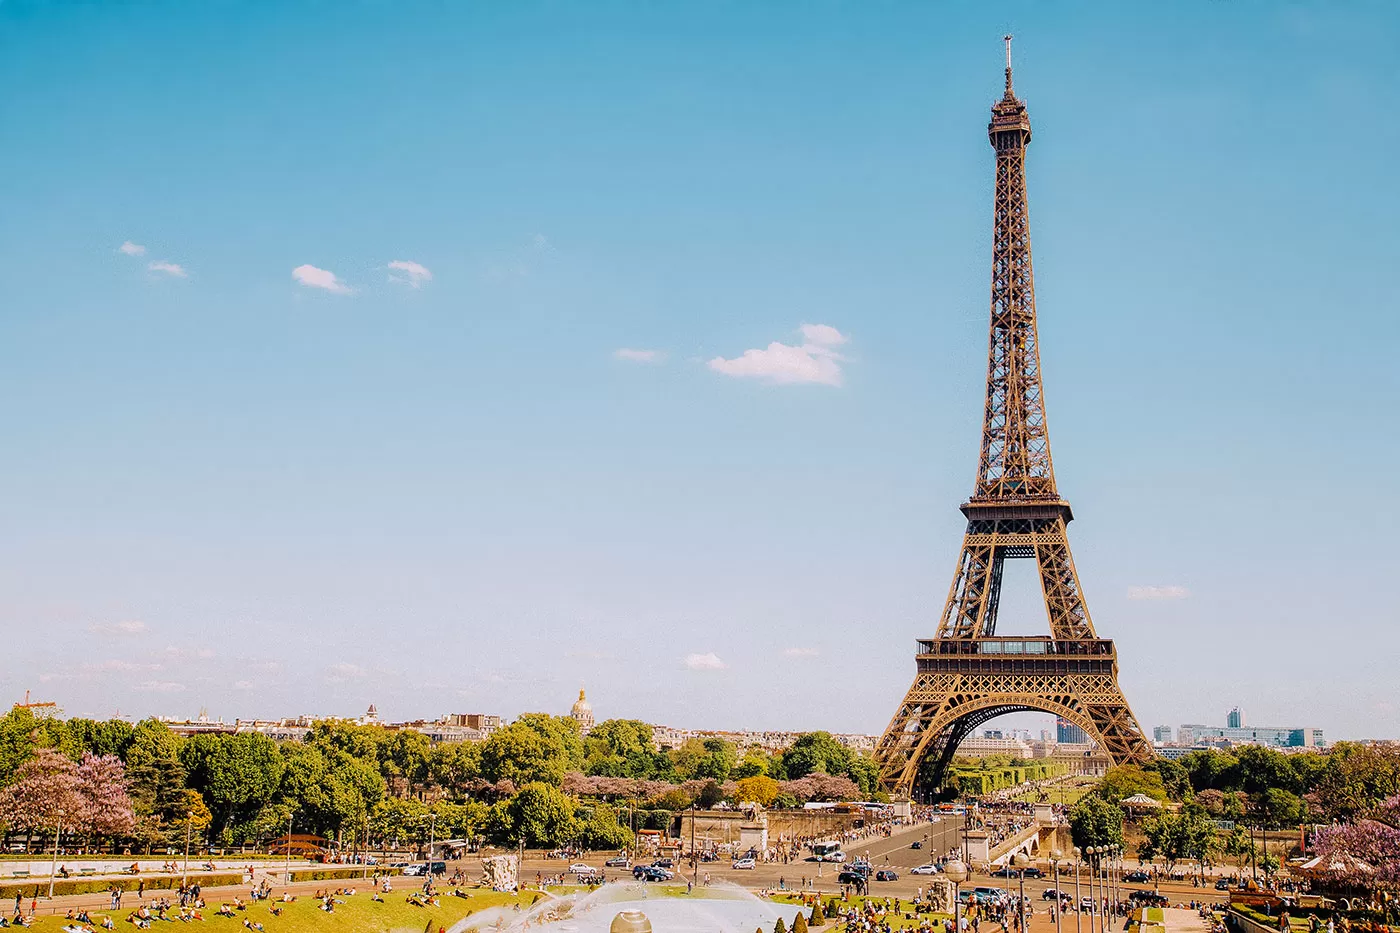 History of the Eiffel Tower ; When was the Eiffel Tower Built and Why